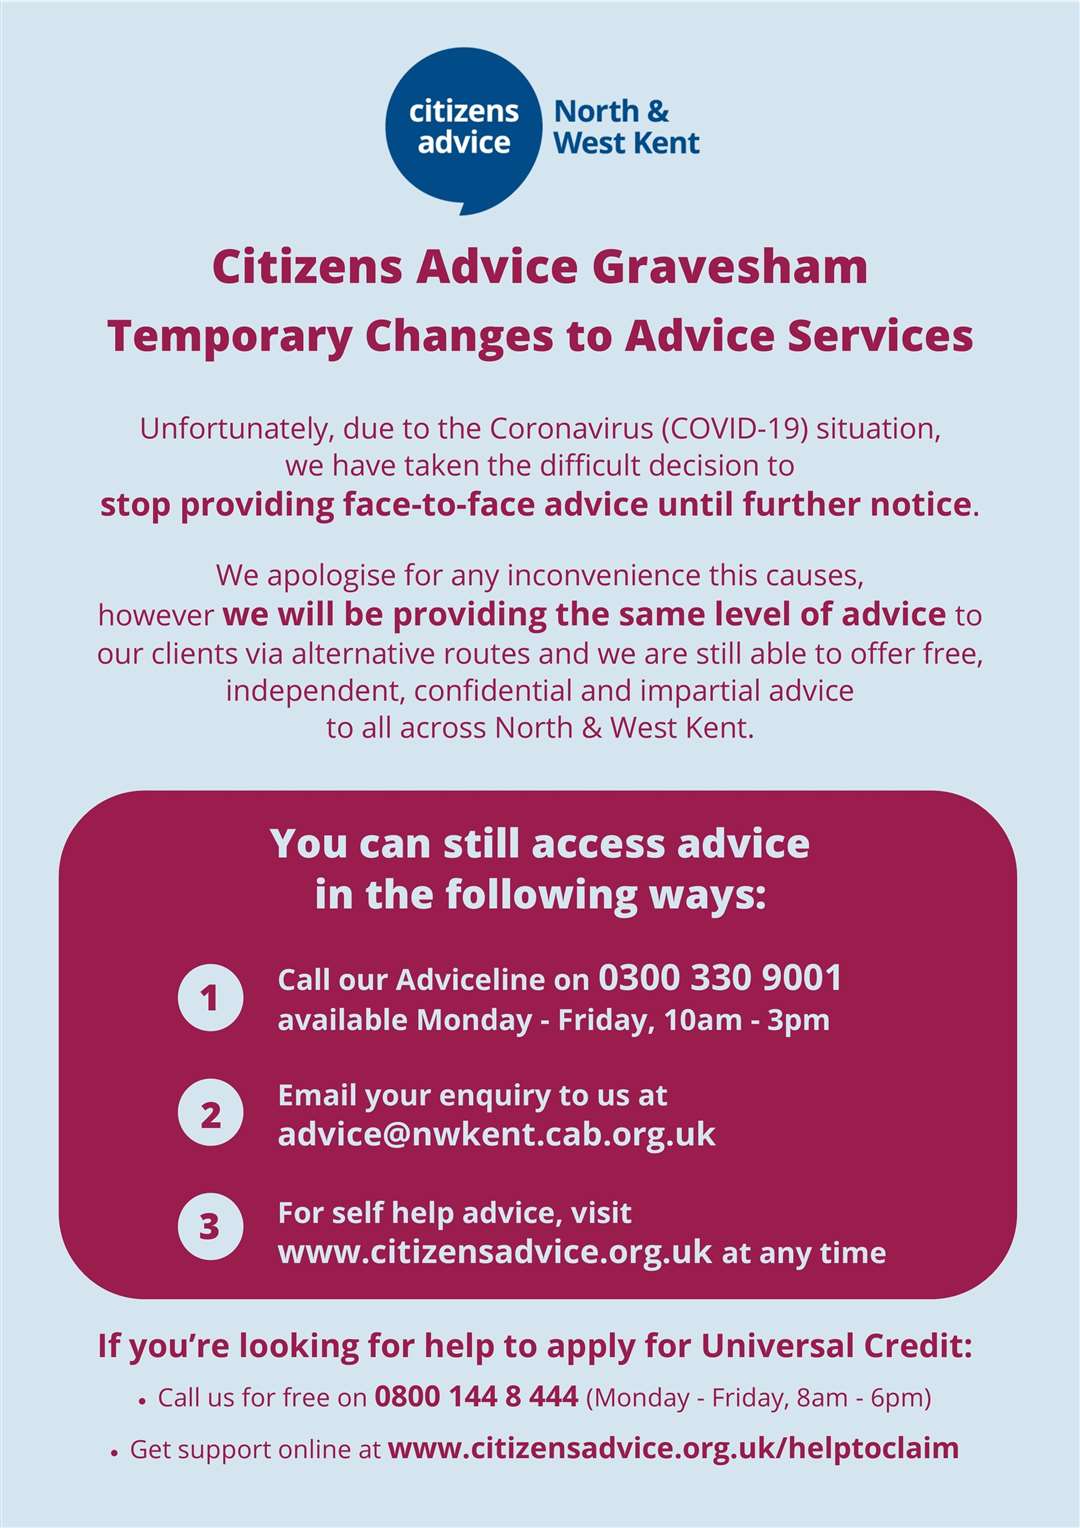 Temporary changes to Citizens Advice services in Gravesham